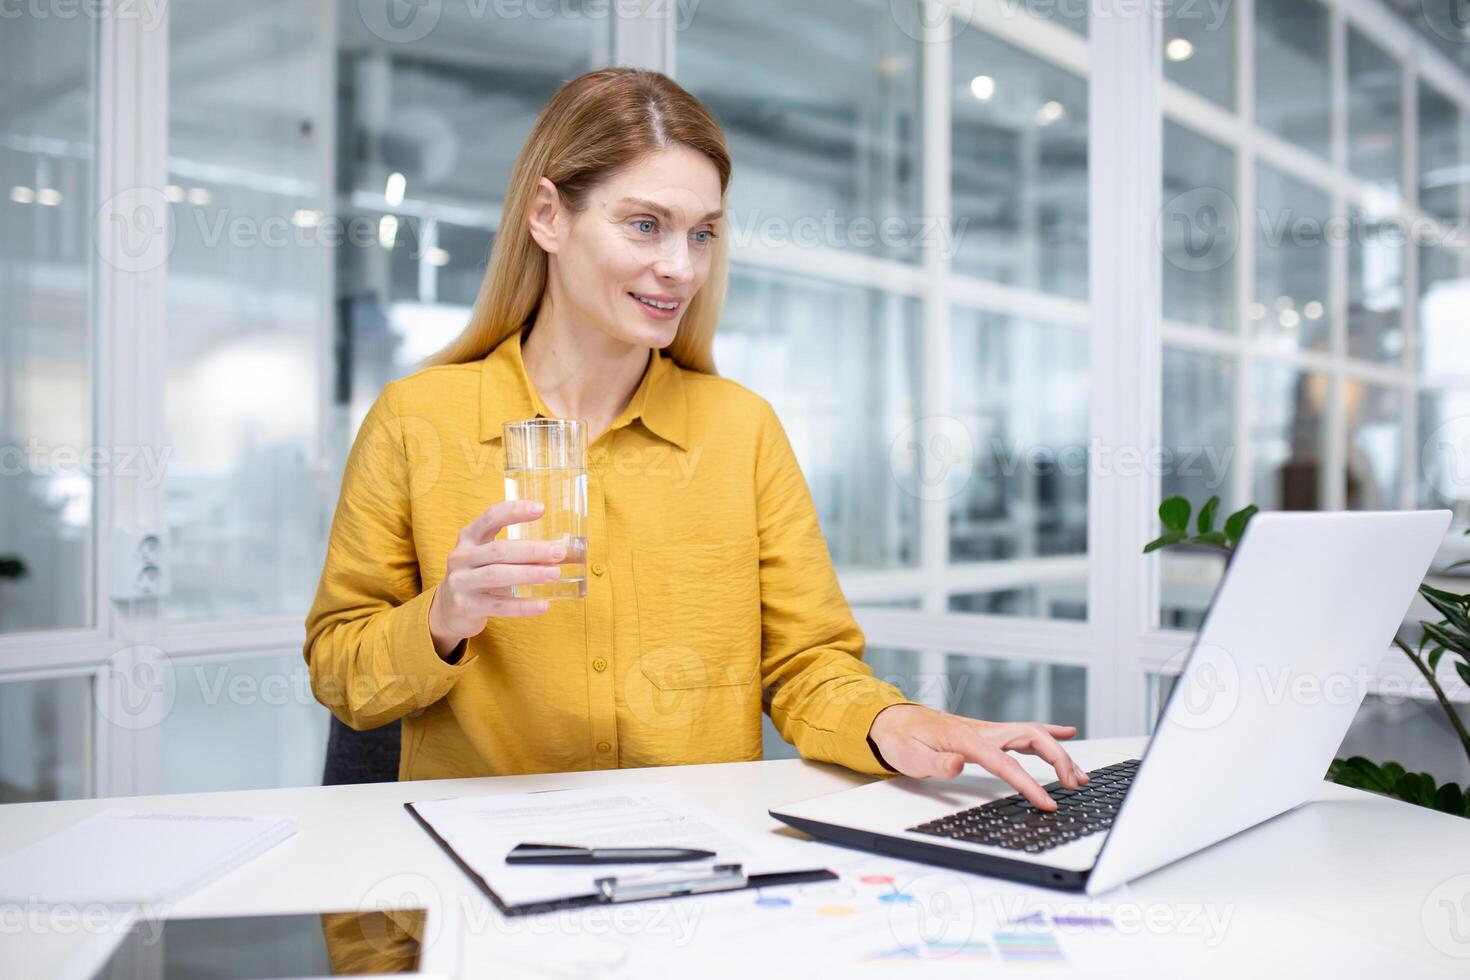 Attractive blonde woman works in a modern office, sits at a desk in front of a laptop, holds a glass in her hand and drinks water, the concept of a healthy lifestyle, healthy habits. photo